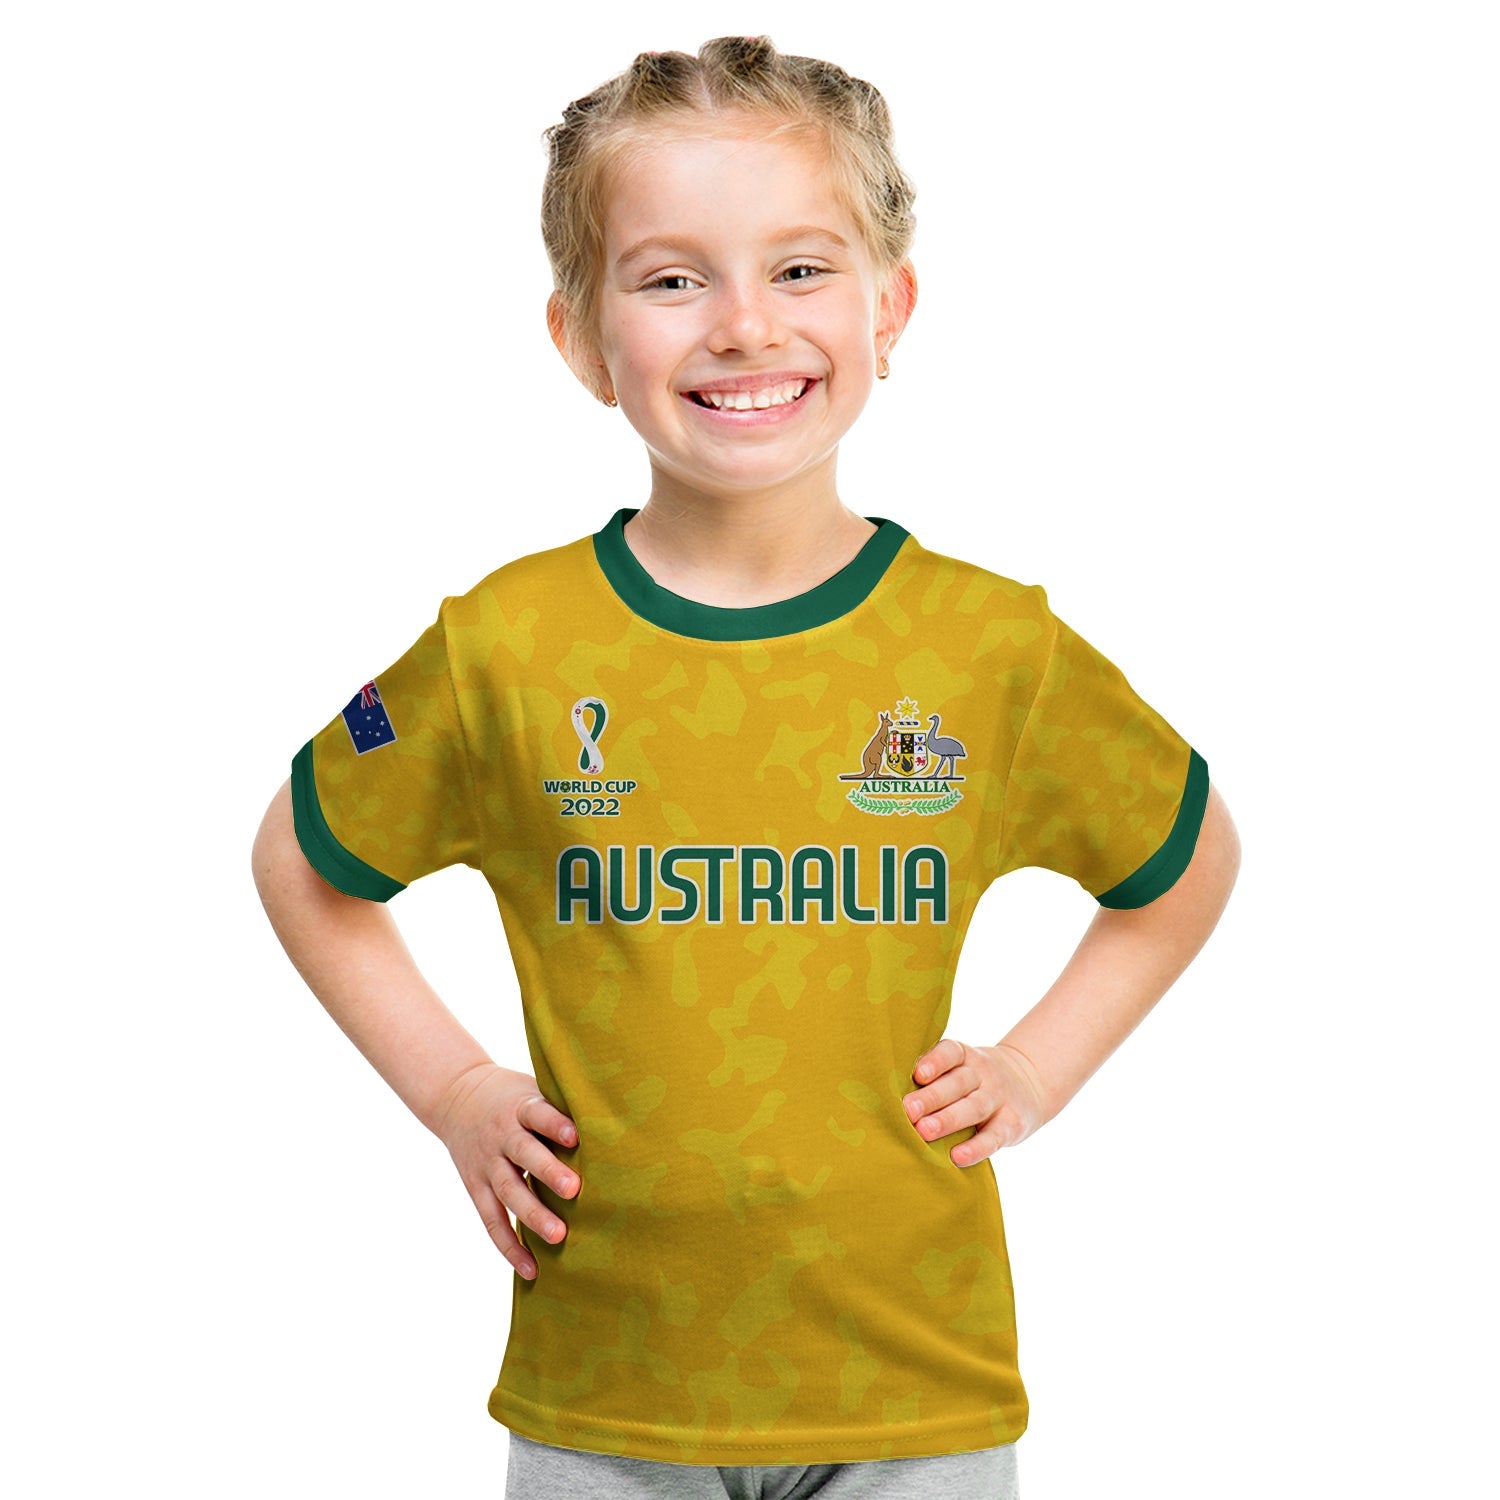 custom-text-and-number-australia-soccer-t-shirt-kid-world-cup-football-2022-socceroos-with-kangaroos